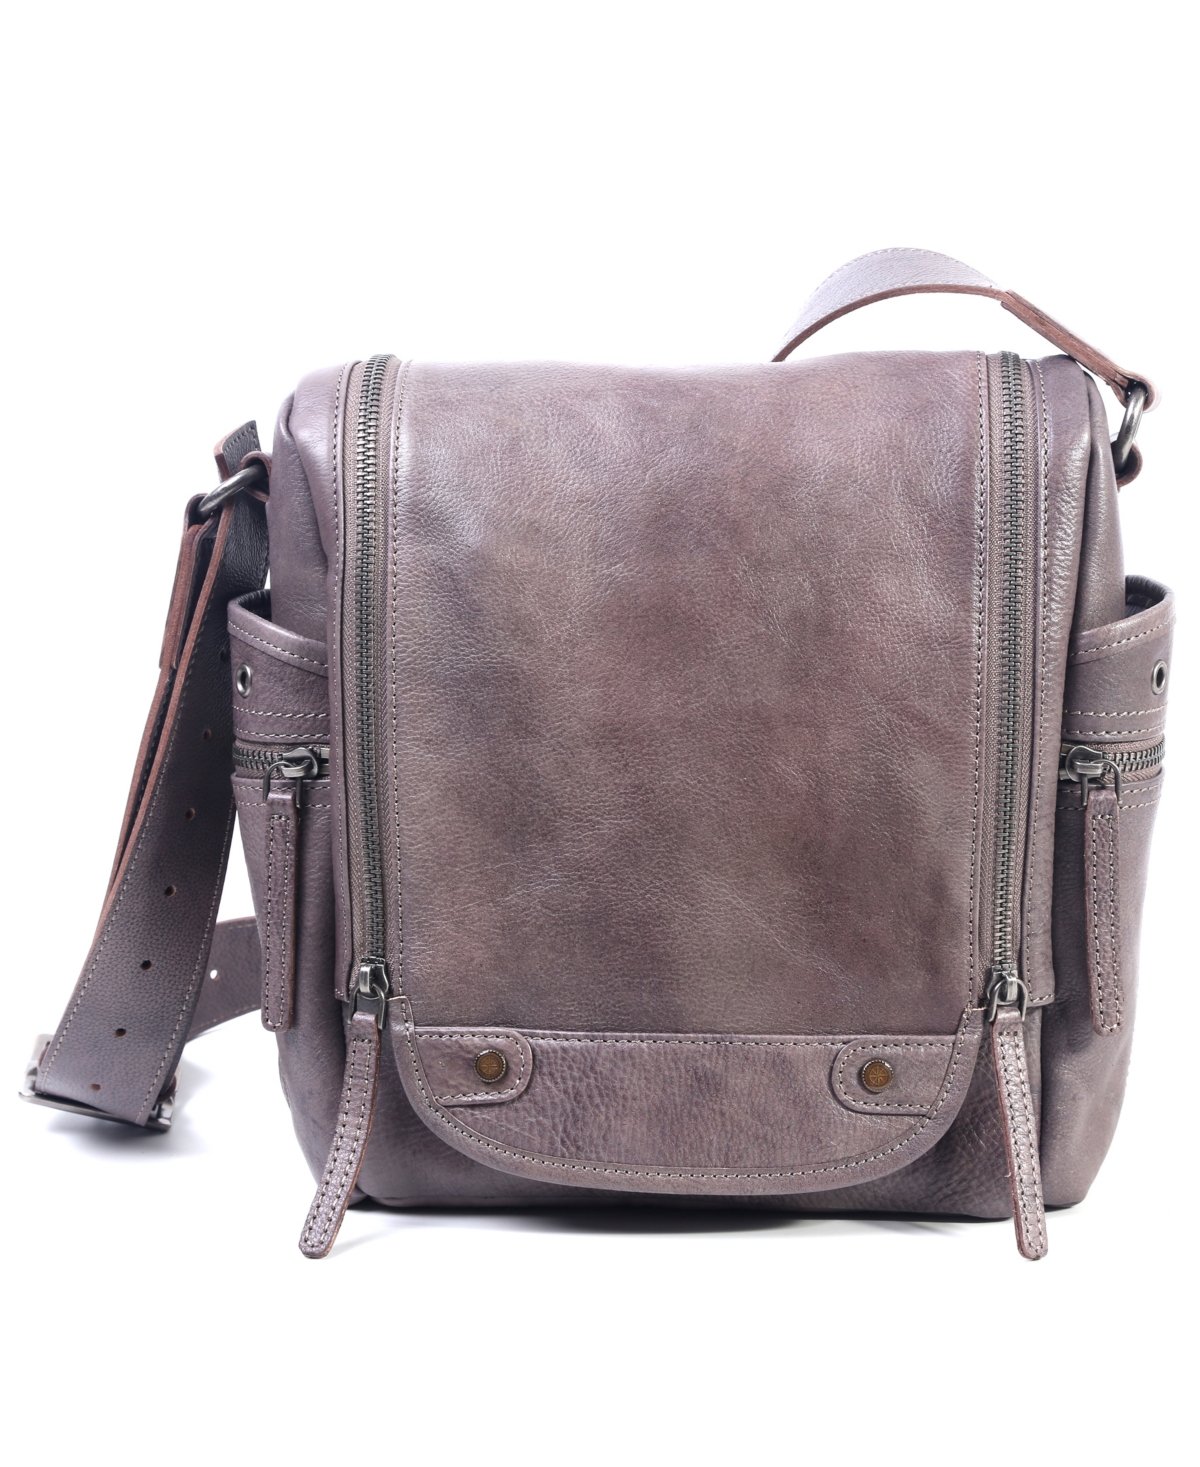 Women's Genuine Leather Rock Hill Crossbody Bag - Taupe